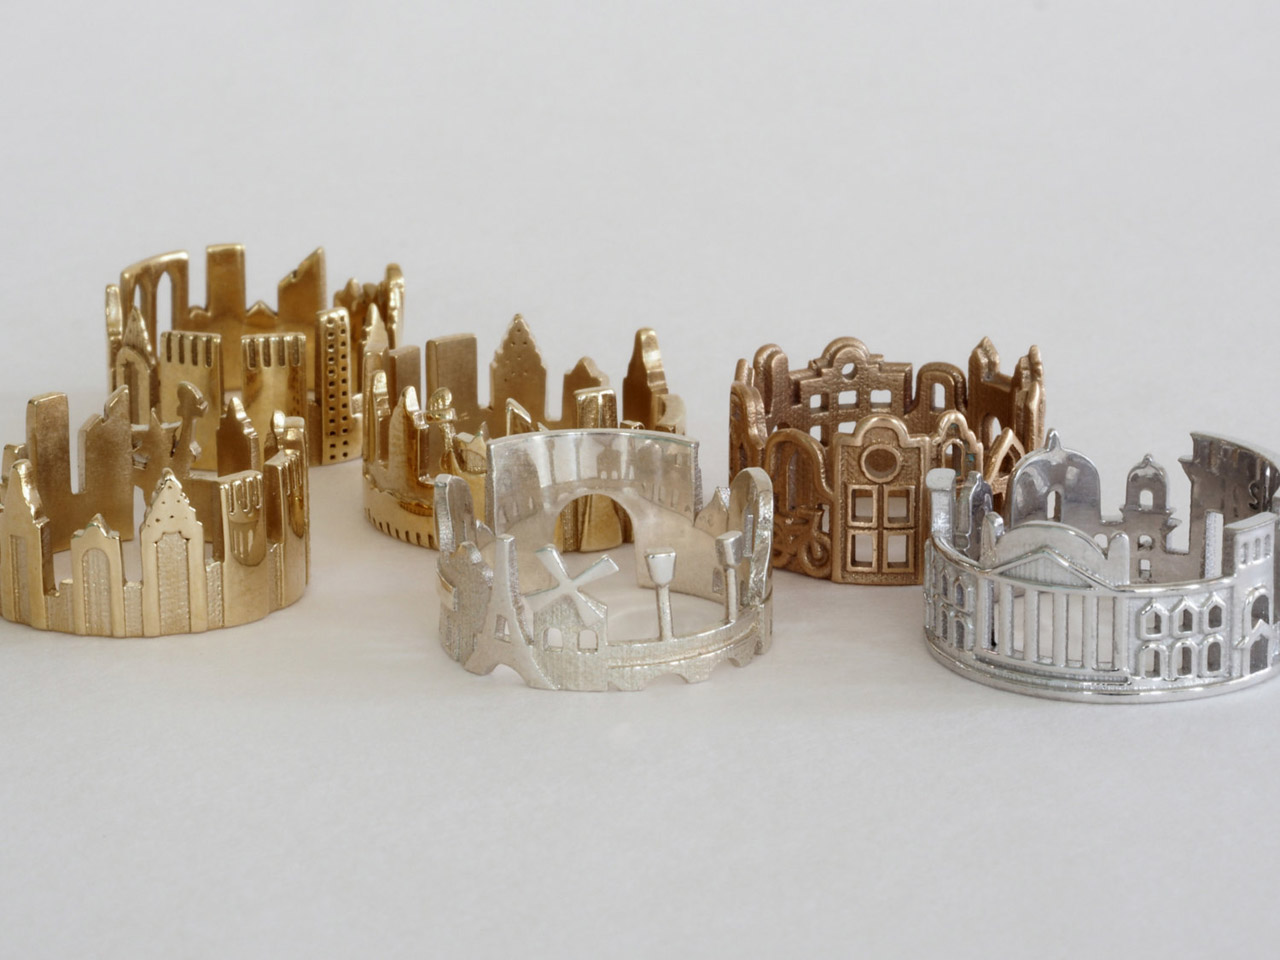 Architecture-Inspired Rings that Focus on City Skylines